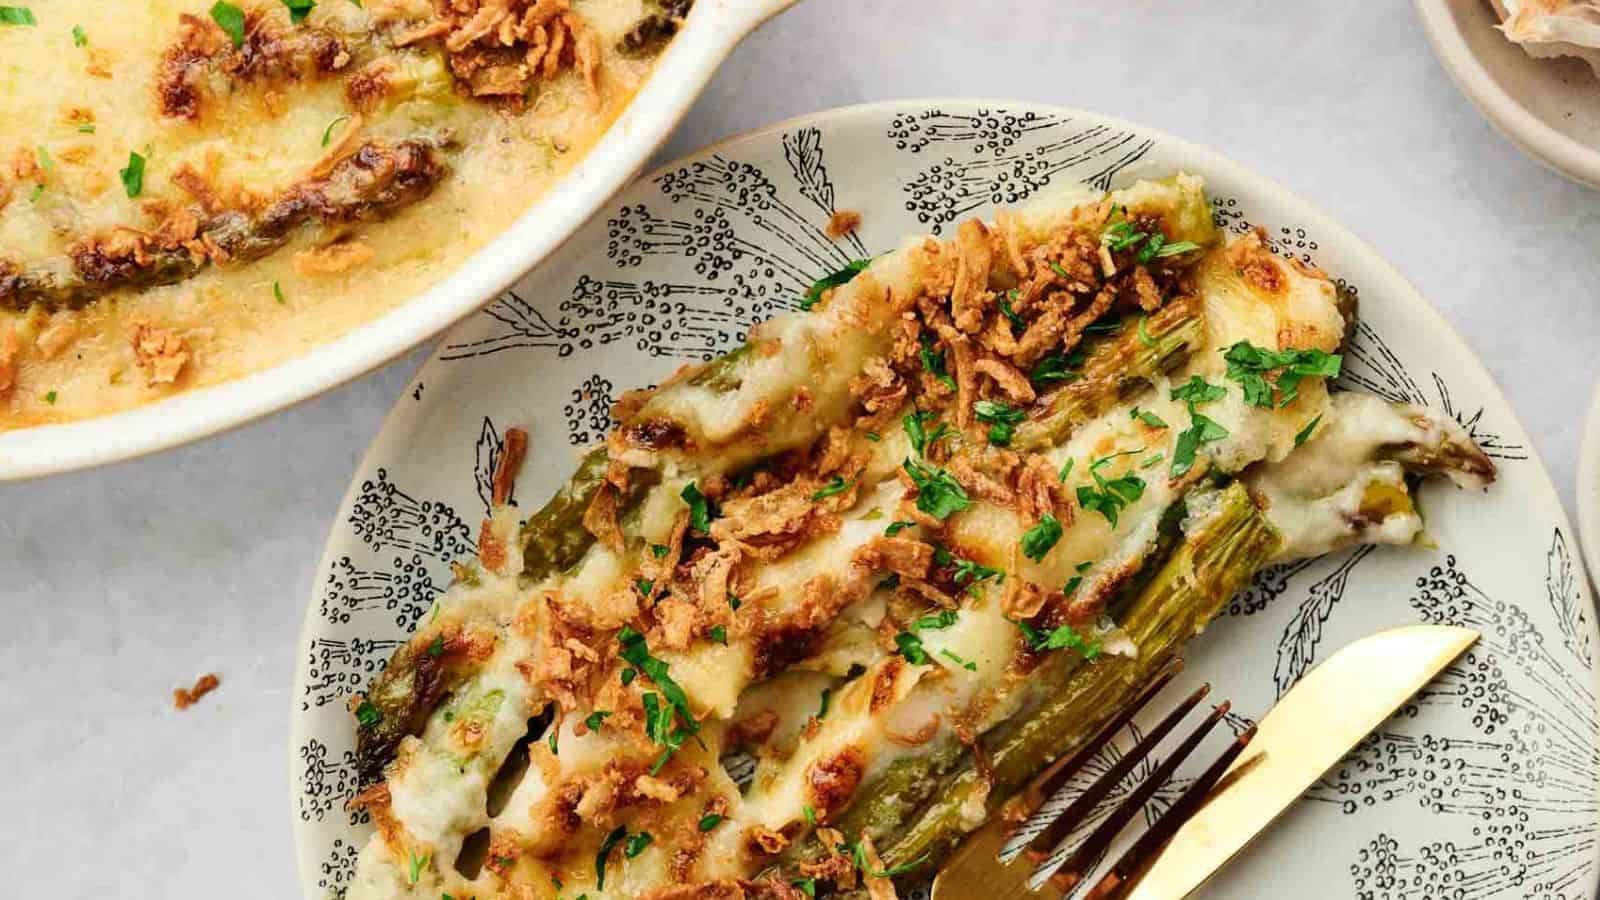 13 Wallet-Friendly Casseroles Stretched For Family Fill Up